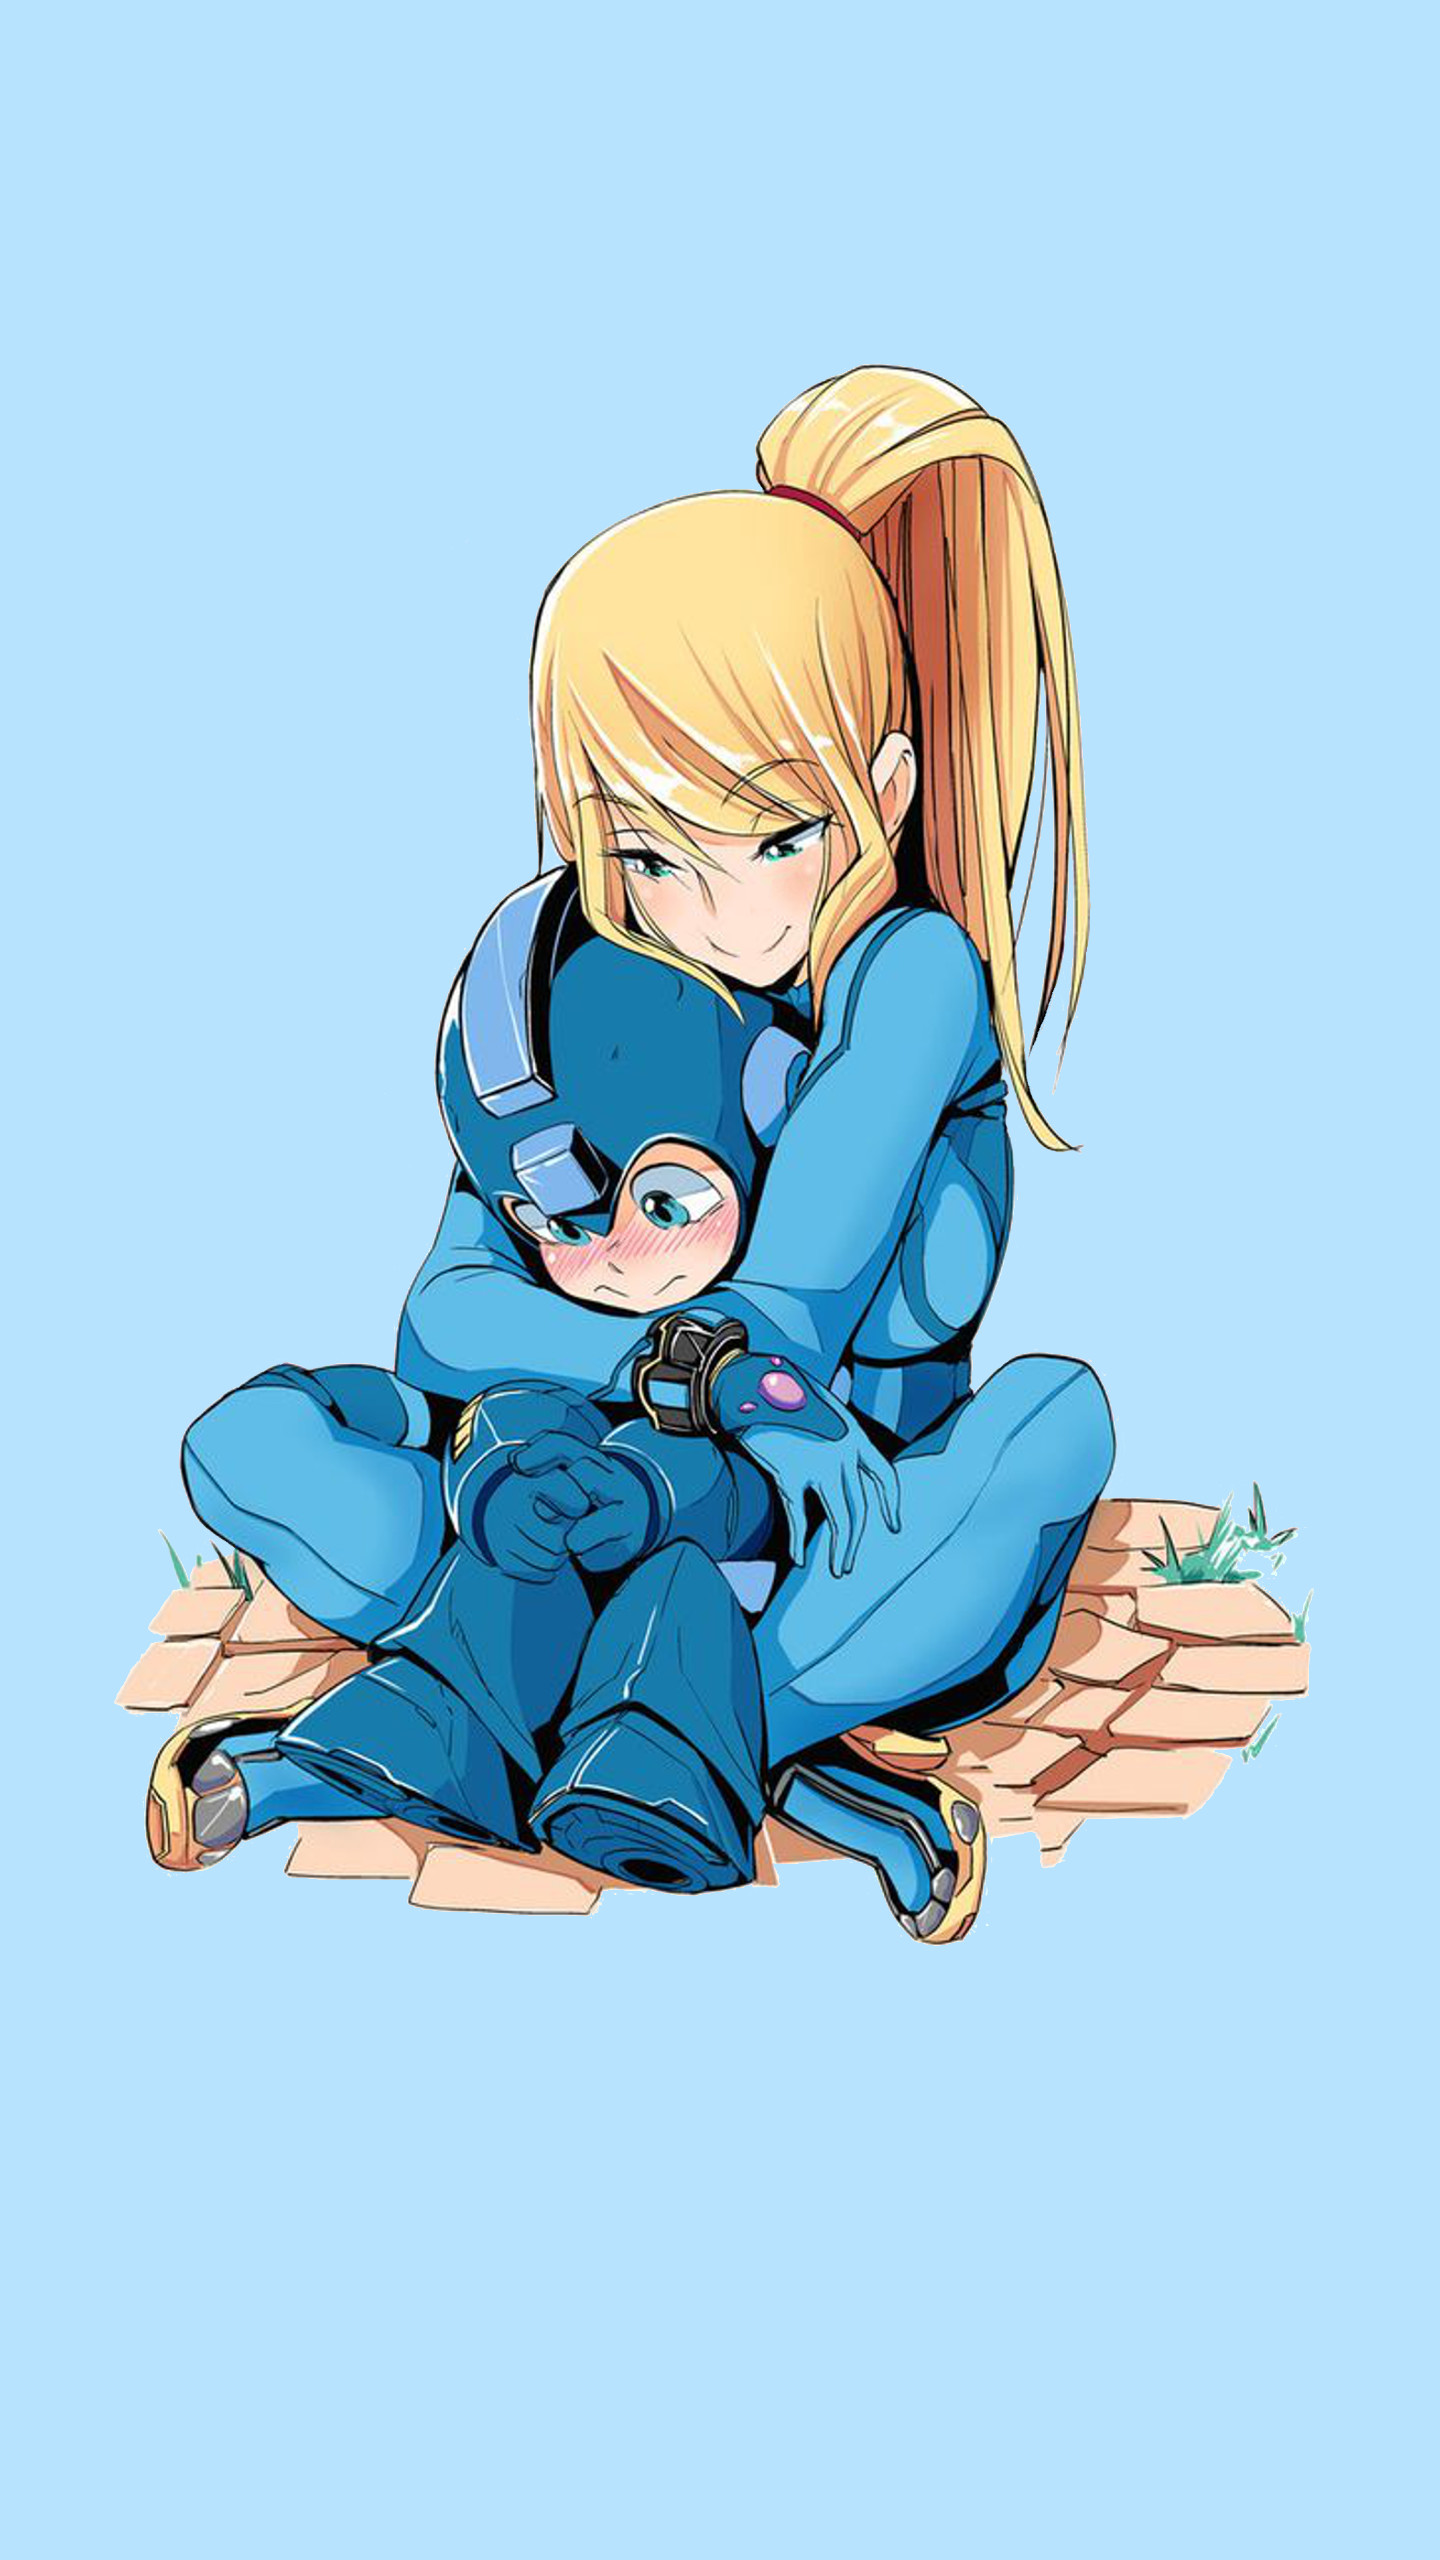 Mega Man and Samus Wallpapers! Computer Wallpaper and a Phone Wallpaper  too! on. Find this Pin and more on Wallpapers …